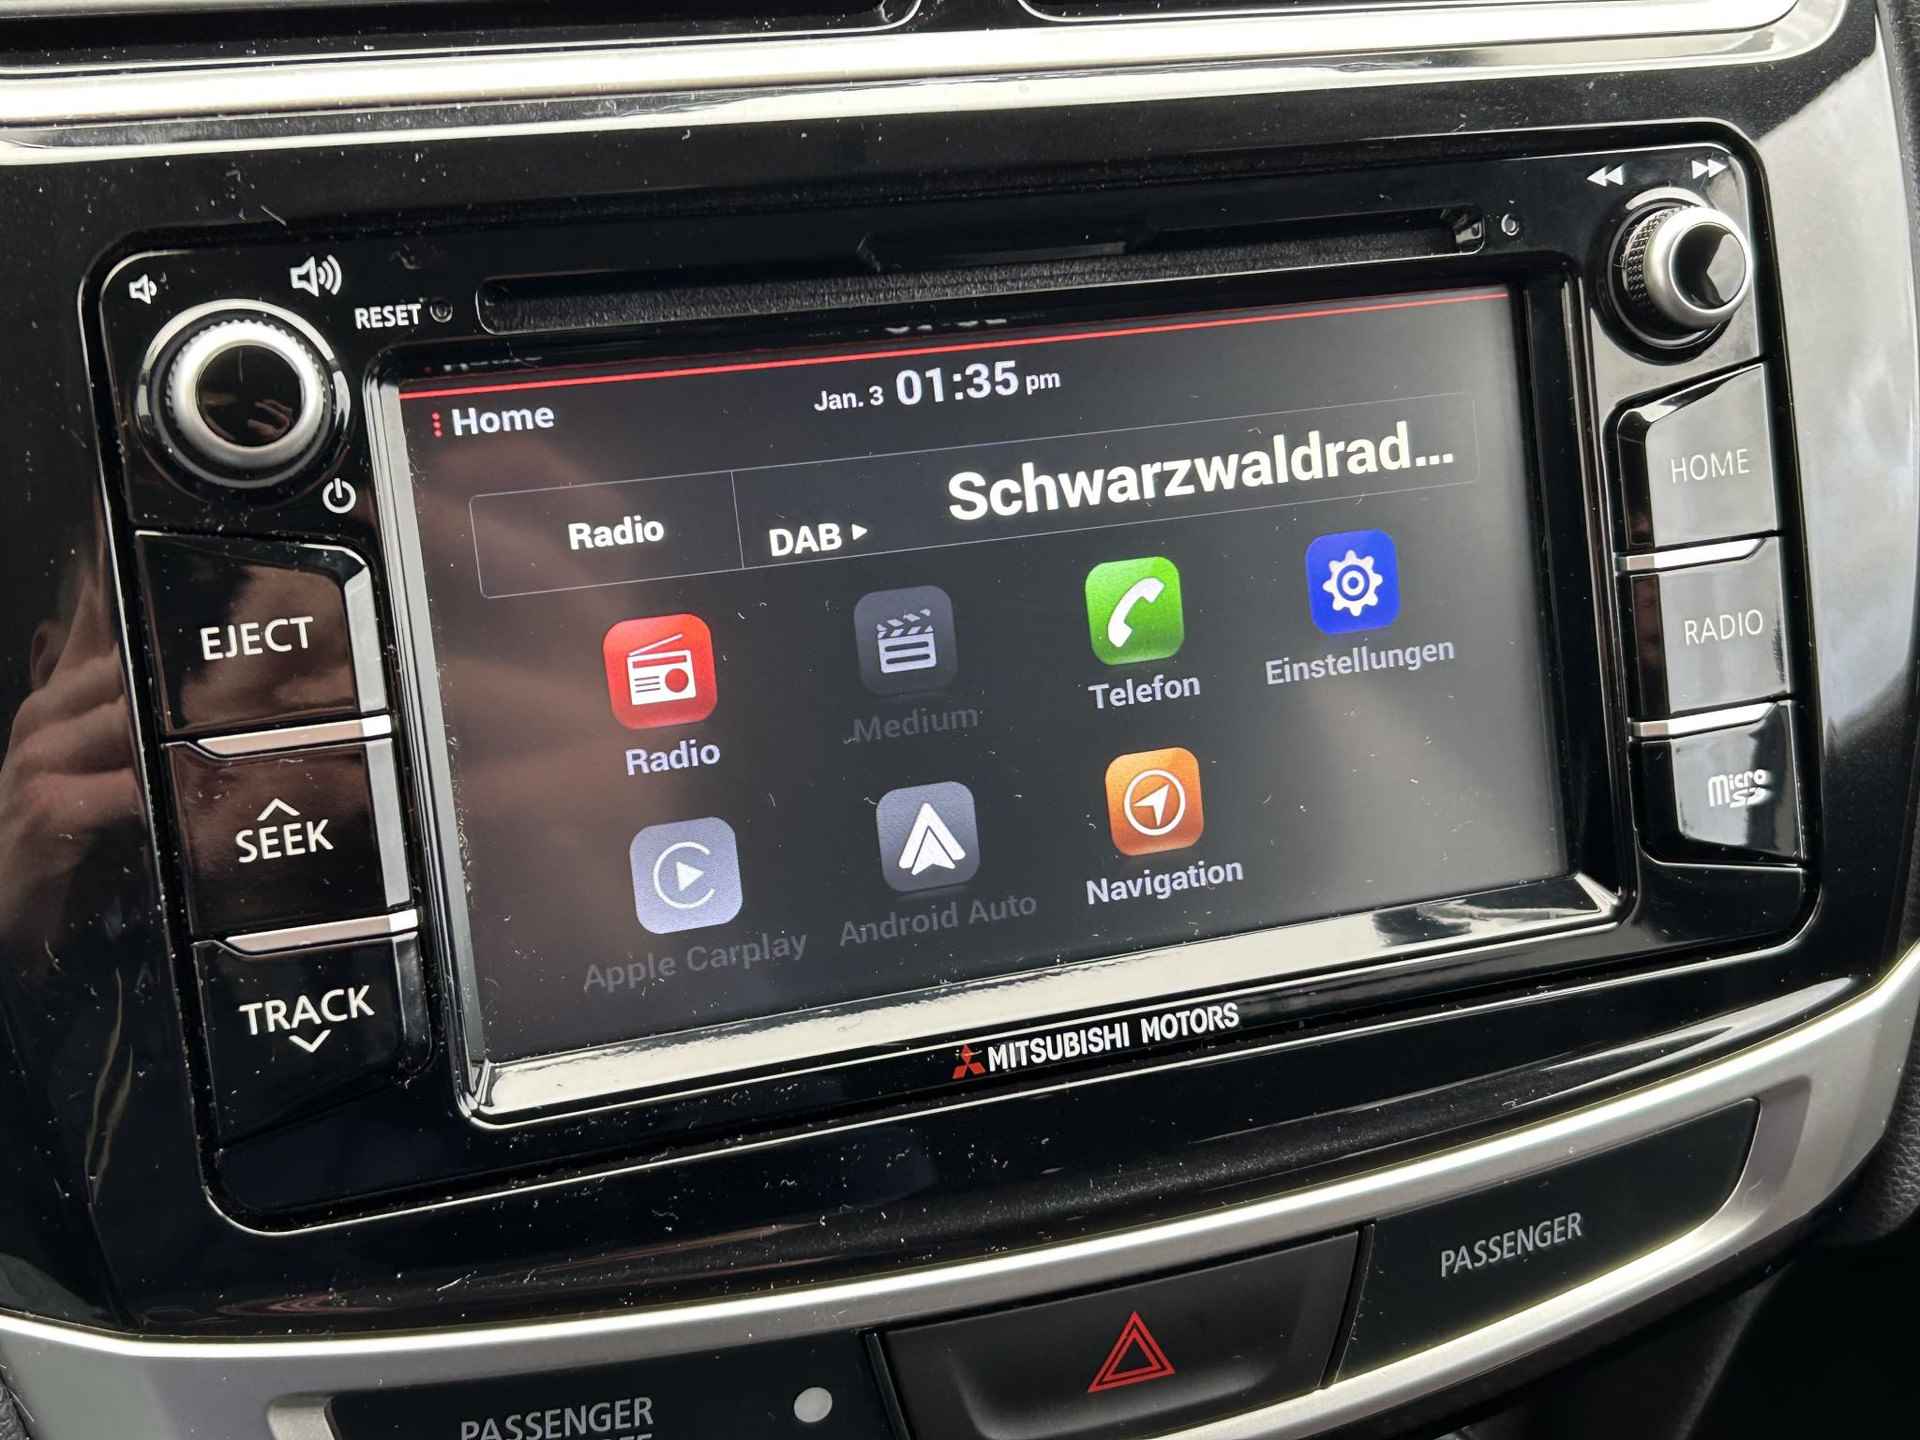 Mitsubishi ASX 1.6 Cleartec Connect Pro / Achteruitrijcamera / Trekhaak / Cruise control / Apple Carplay/Android Auto / INCLUSIEF WINTERSET - 17/36